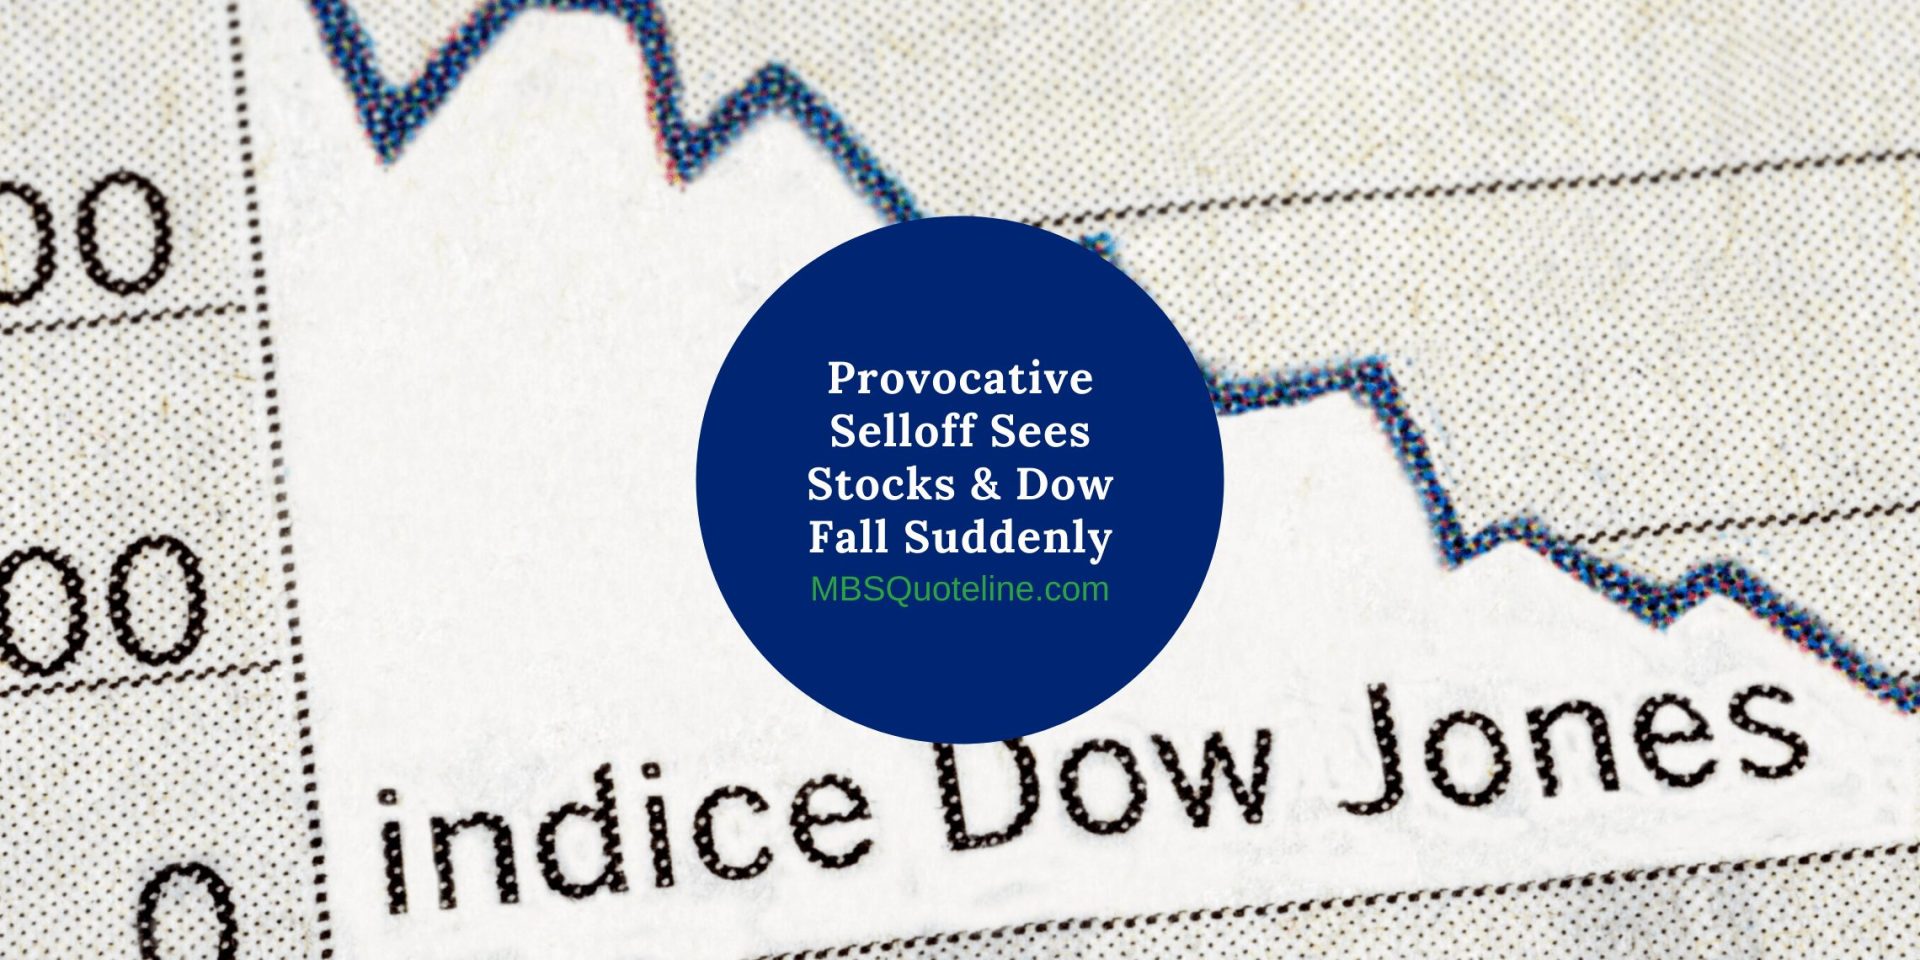 provocative selloff sees stocks down fall suddenly mortgagetime mbsquoteline featured